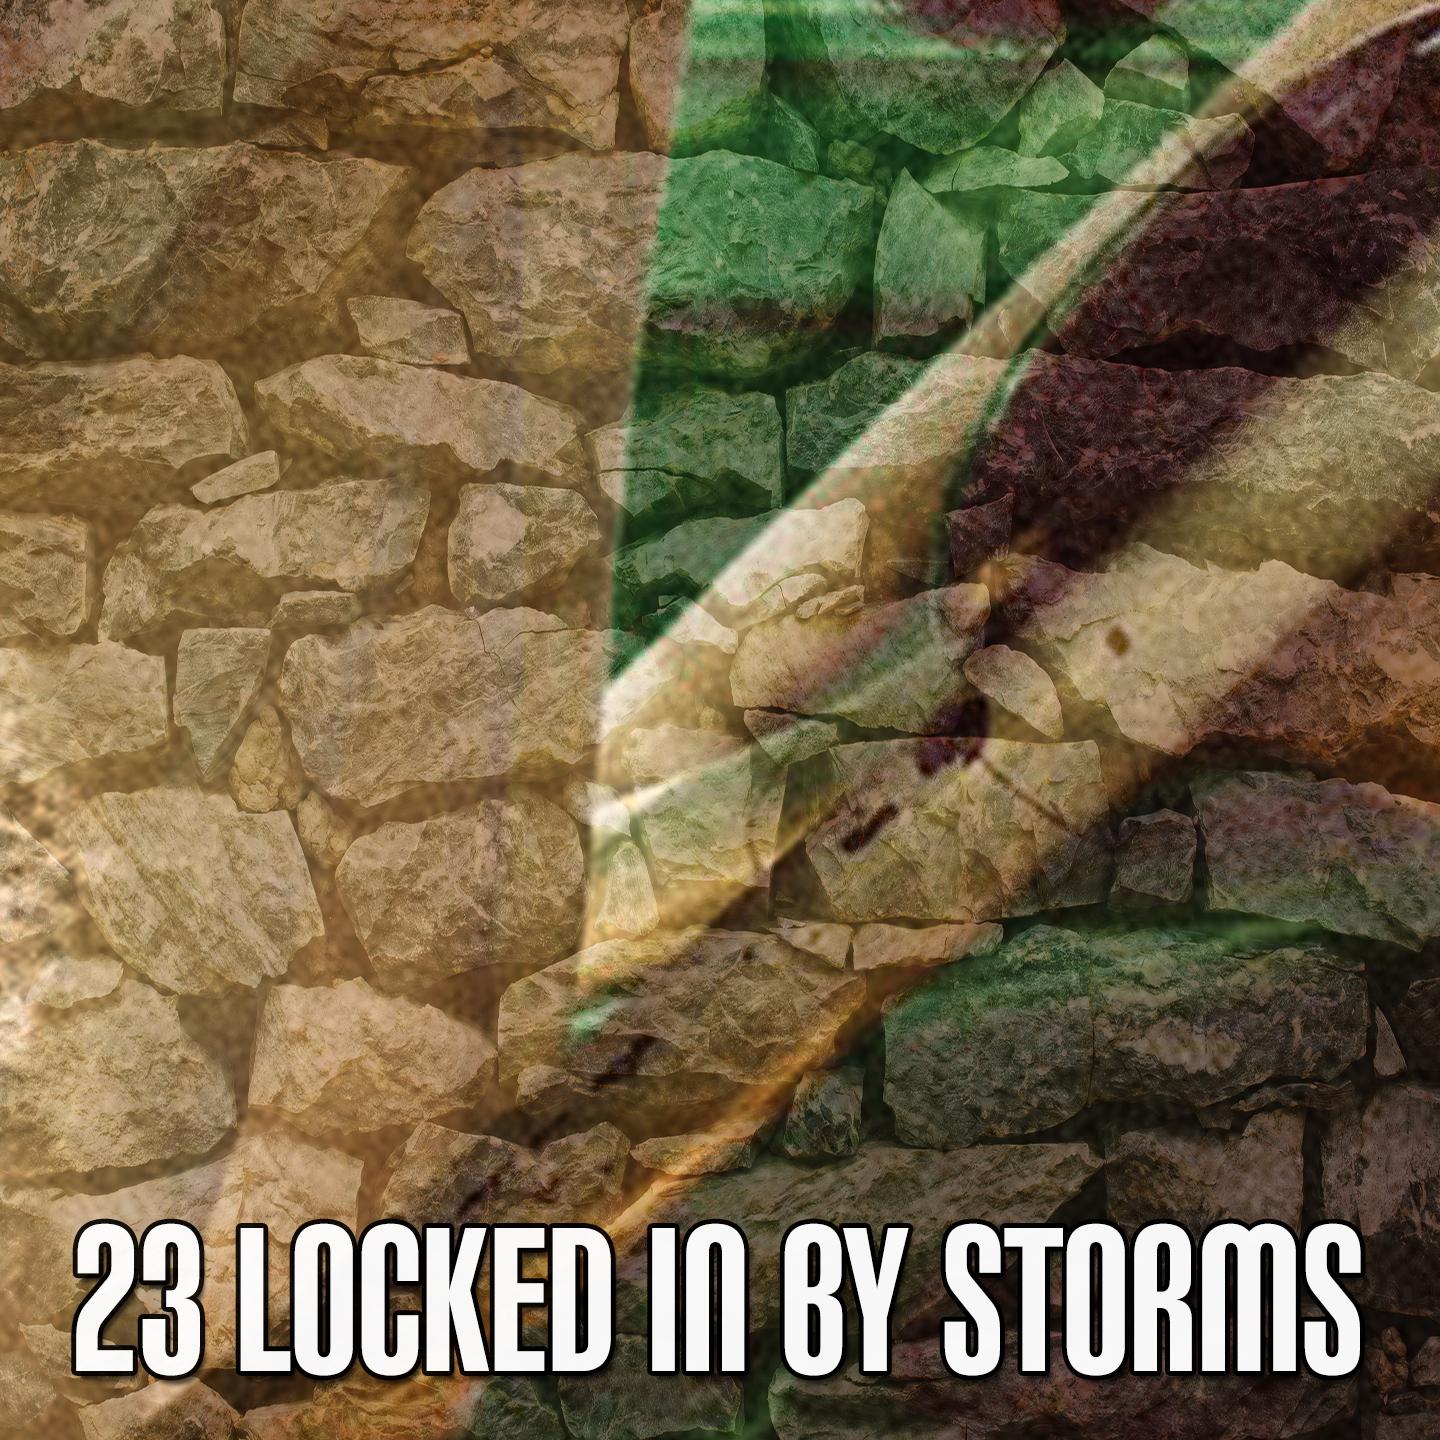 23 Locked In by Storms